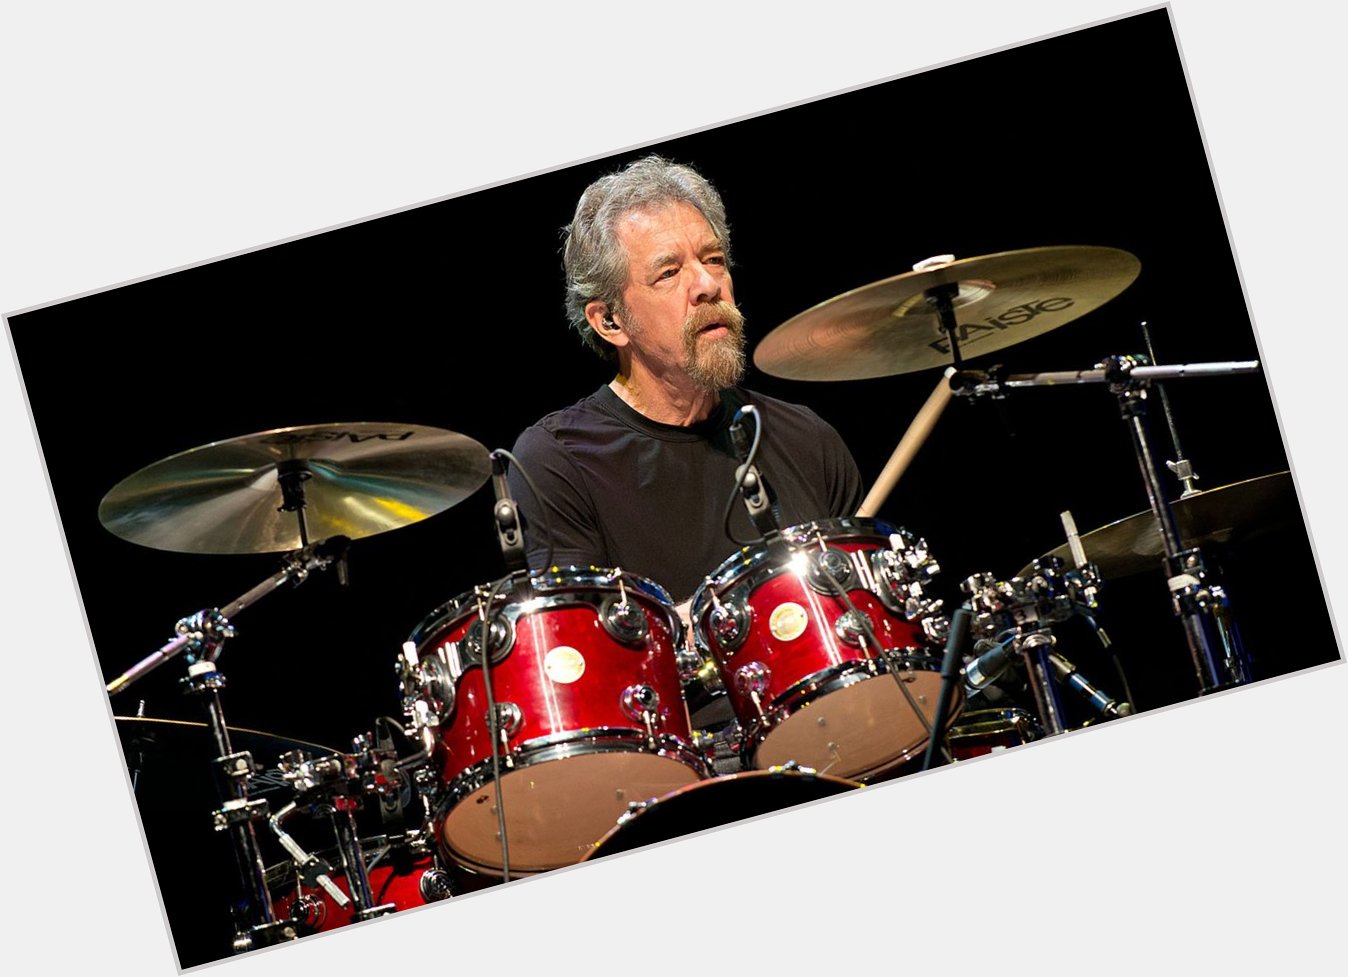 Happy 76th birthday to the amazing Creedence Clearwater Revival drummer Doug Clifford! 